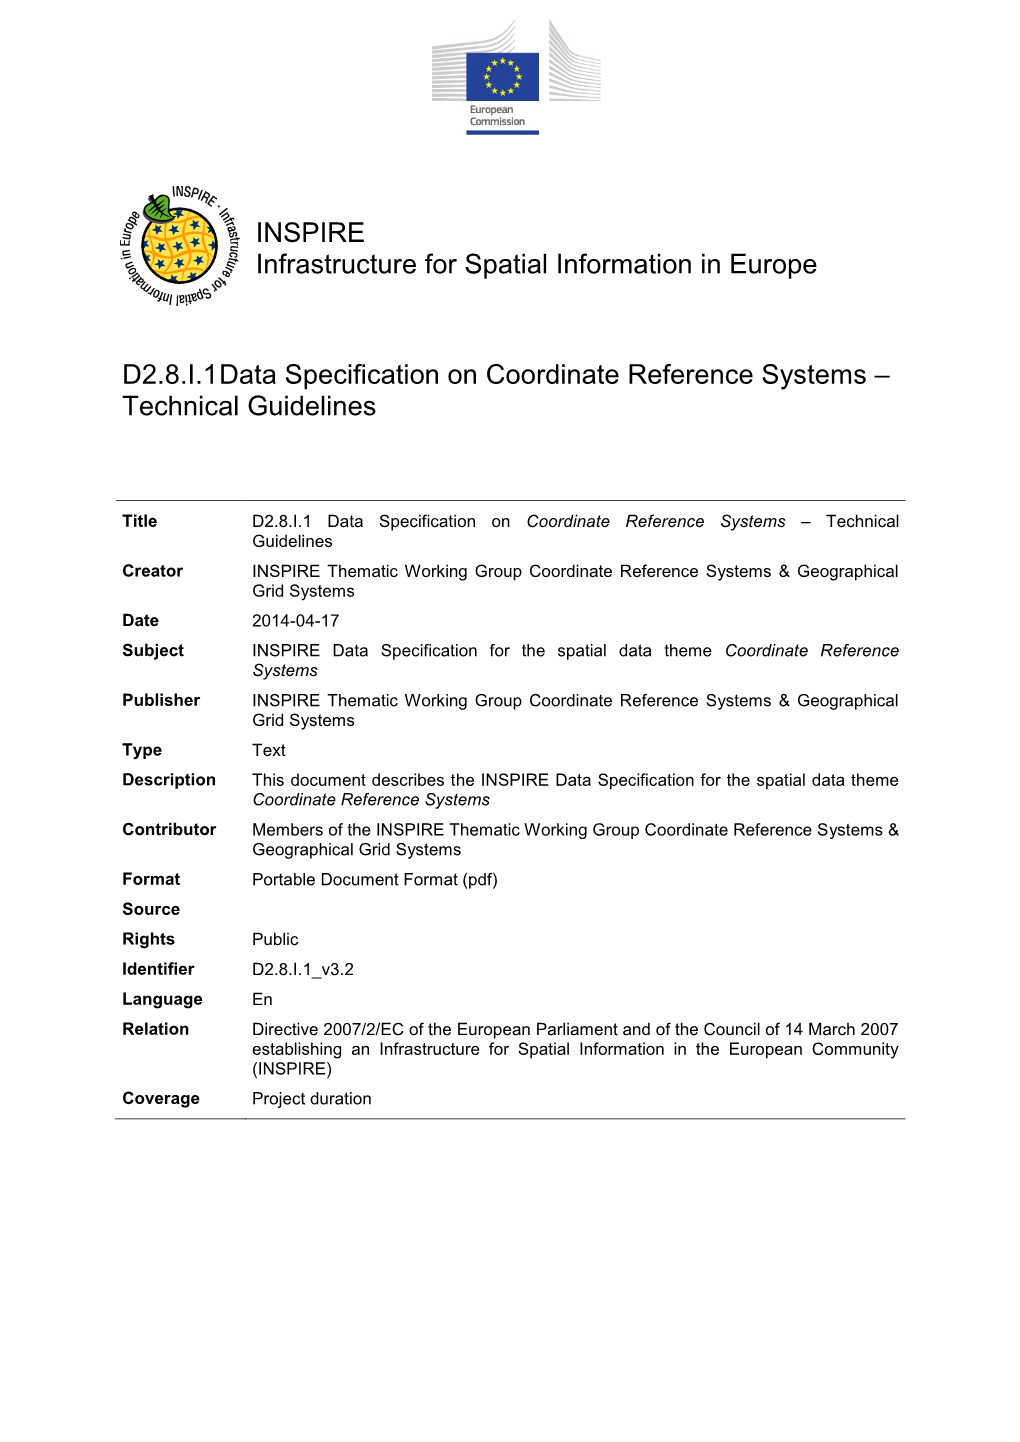 INSPIRE Data Specification on Coordinate Reference Systems